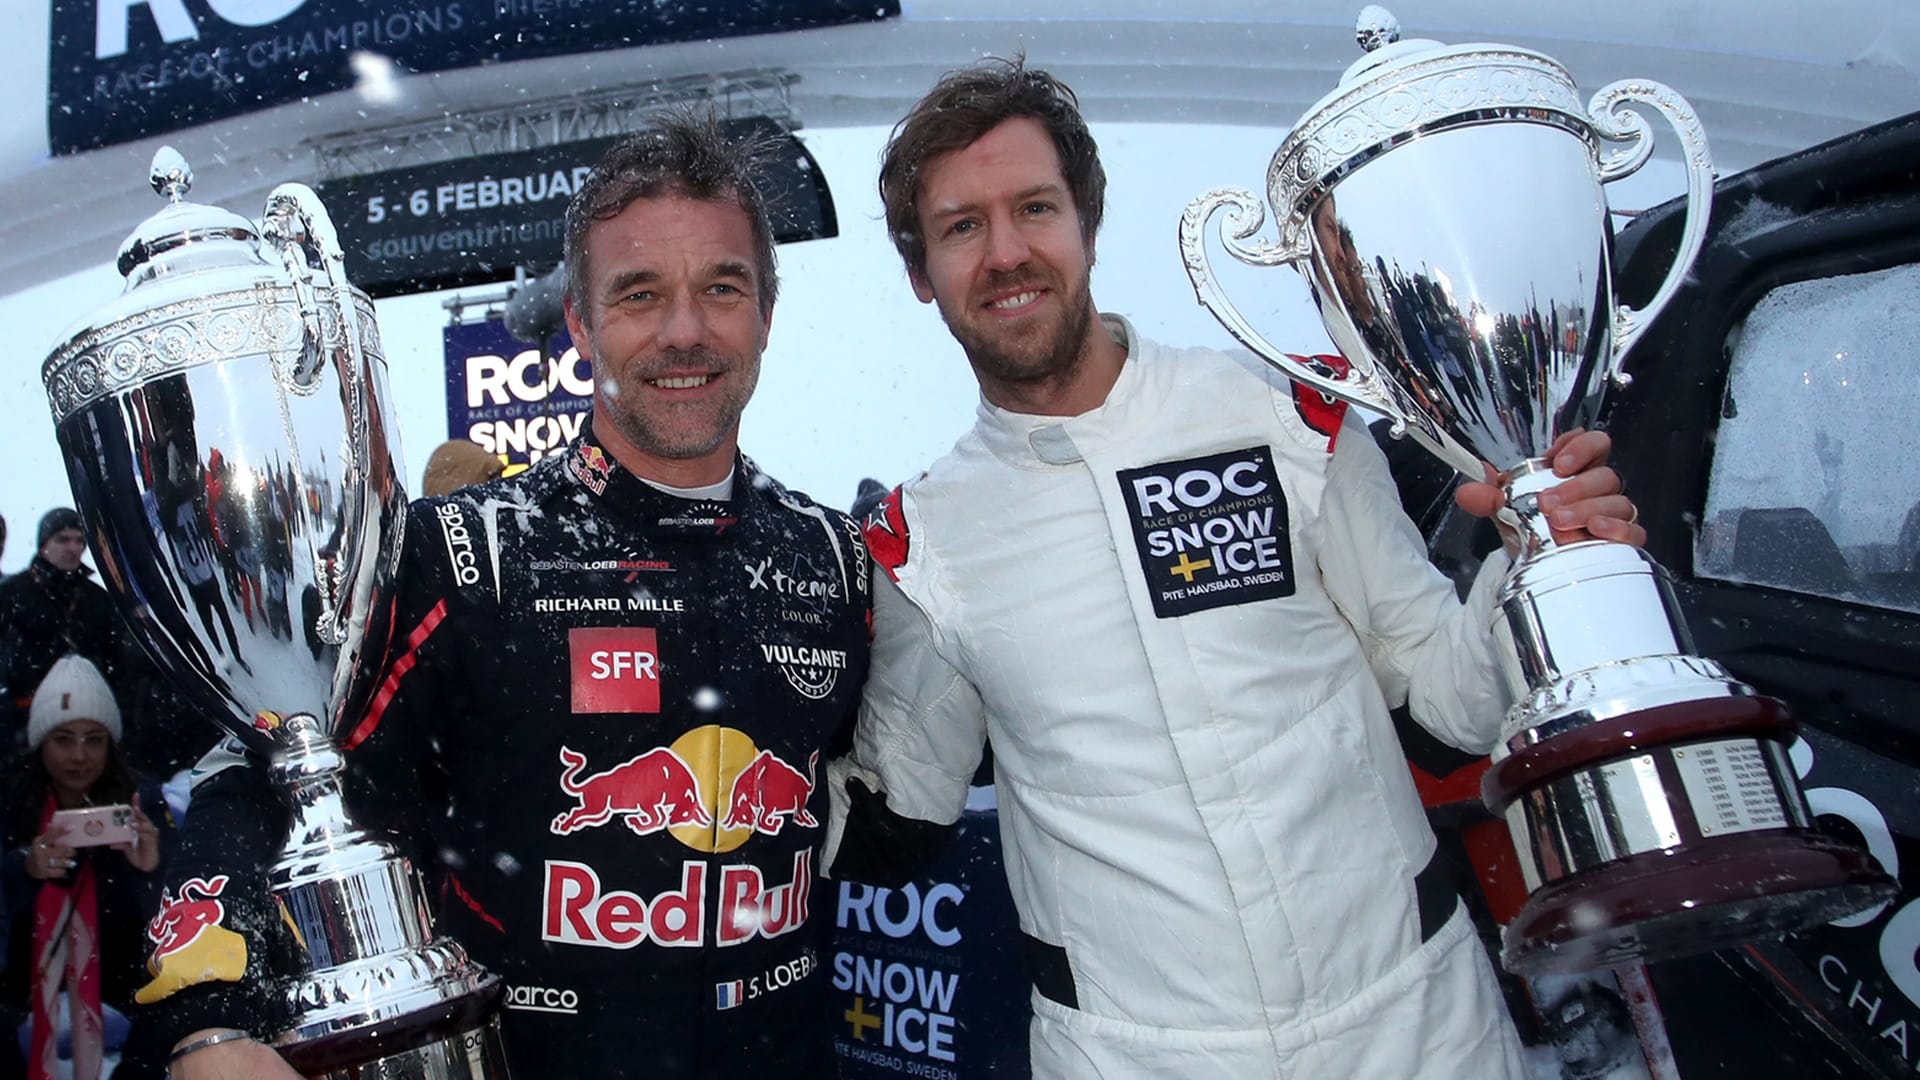 Sebastien was just too fast today' – Vettel loses out to Loeb in